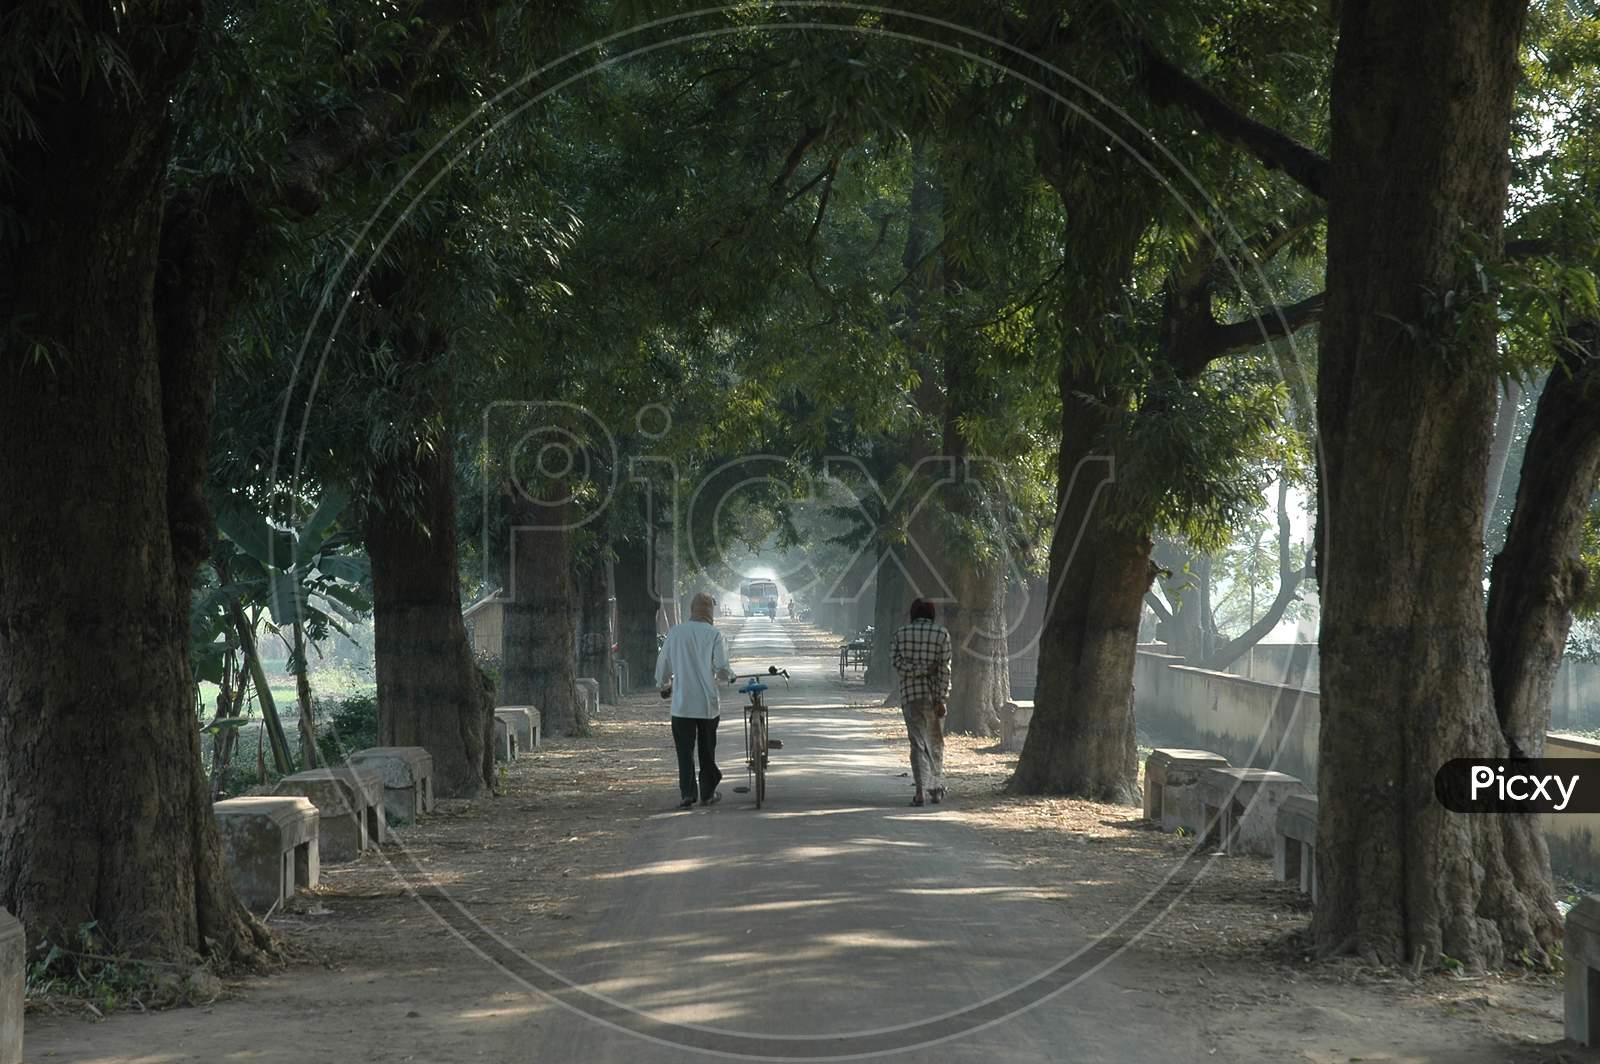 A Pathway With Tree Canopy  in Murshidabad, West Bengal